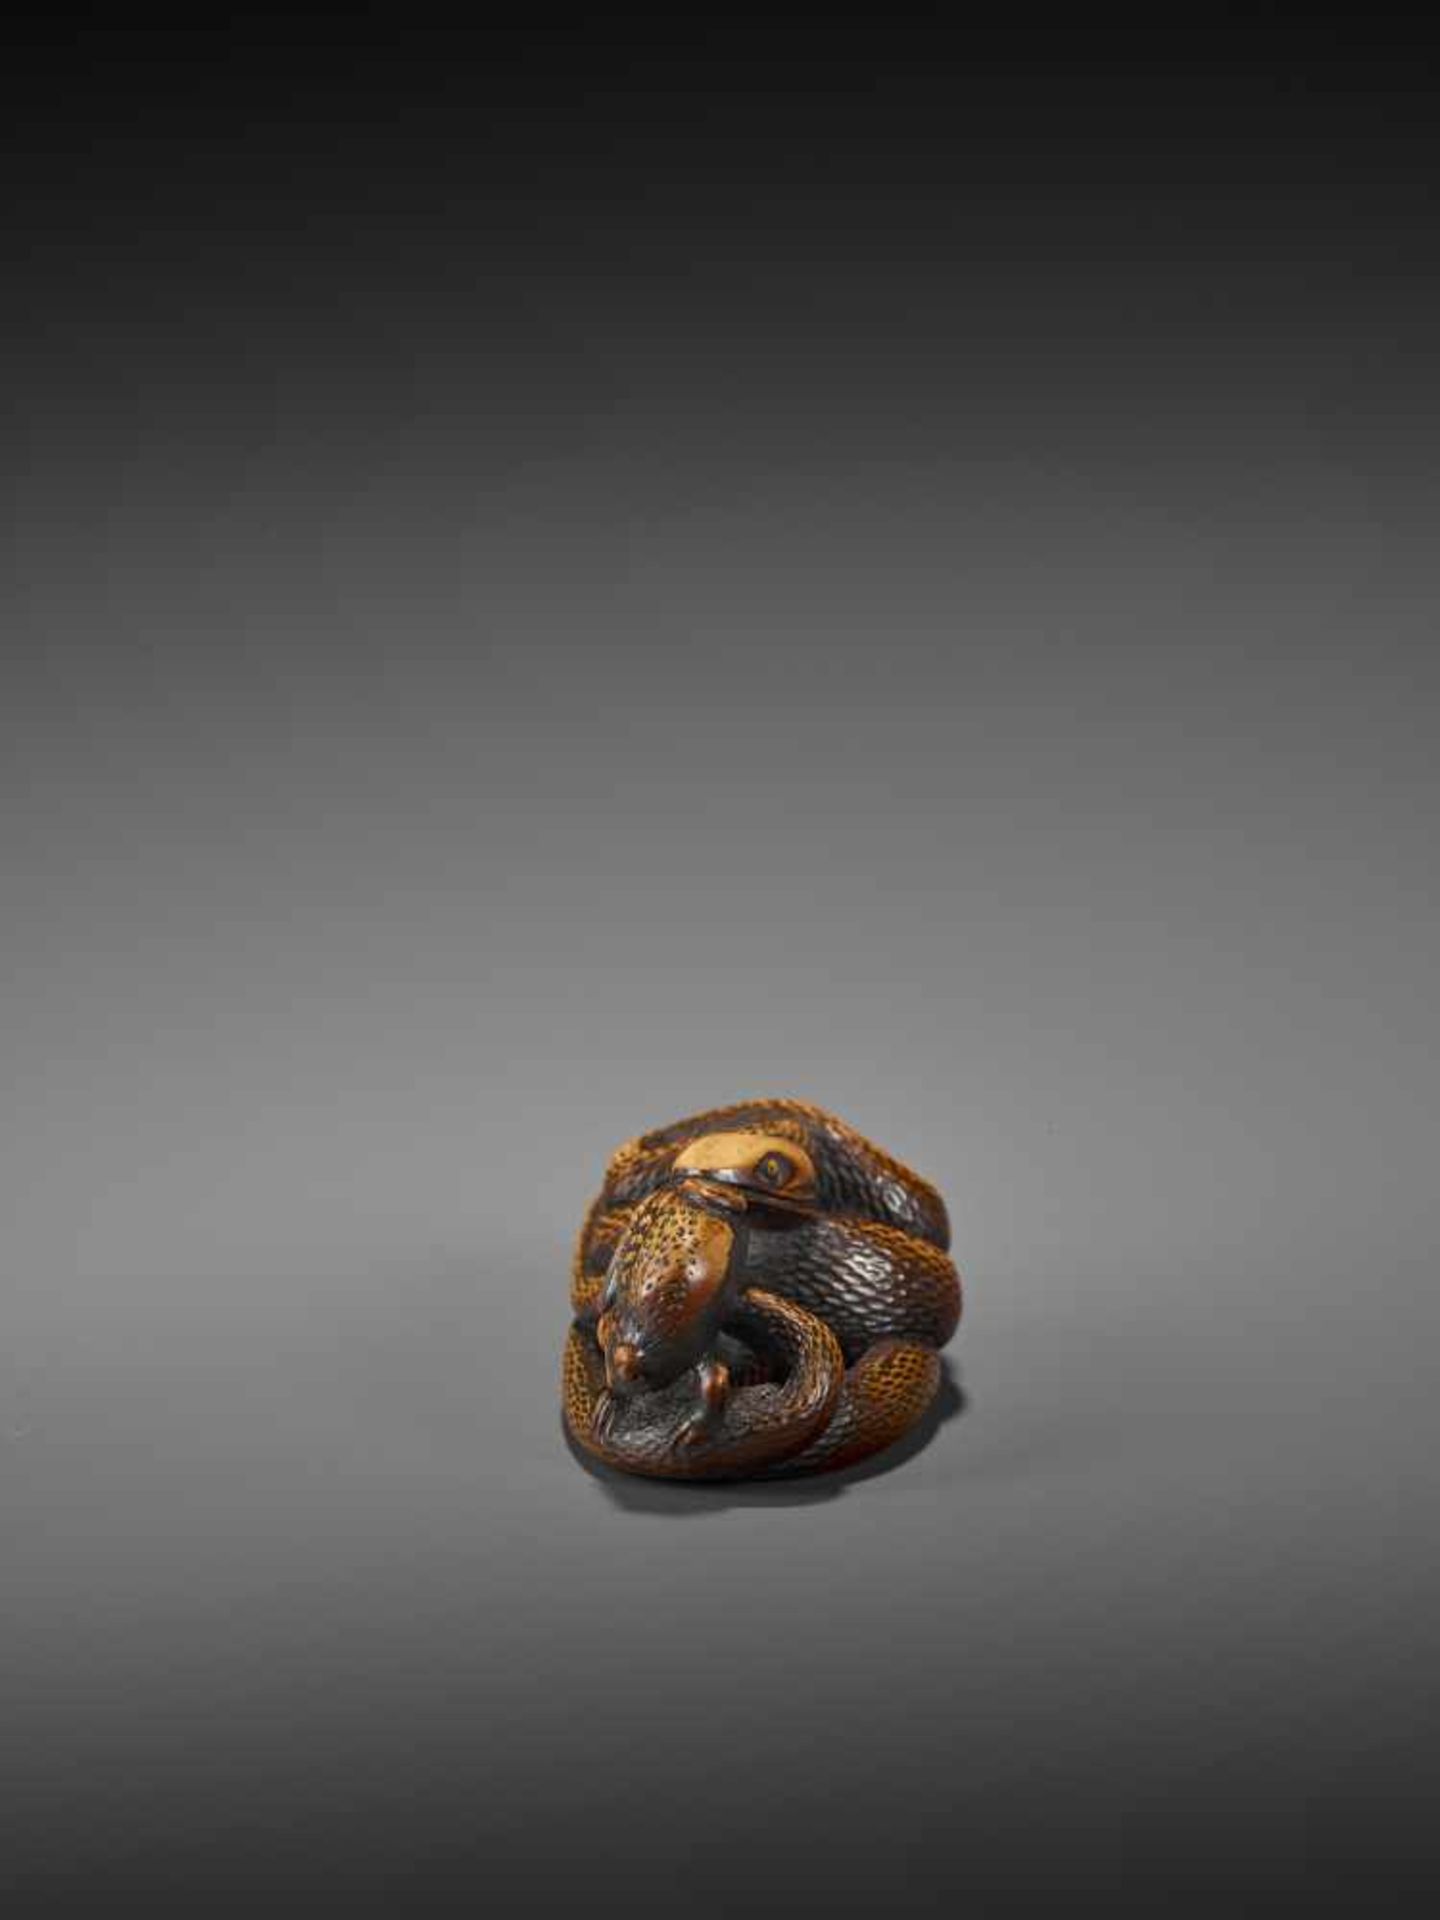 AN EXCELLENT WOOD NETSUKE OF A FROG WITH SNAKE, SANSUKUMI UnsignedJapan, late 18th century, Edo - Image 6 of 9